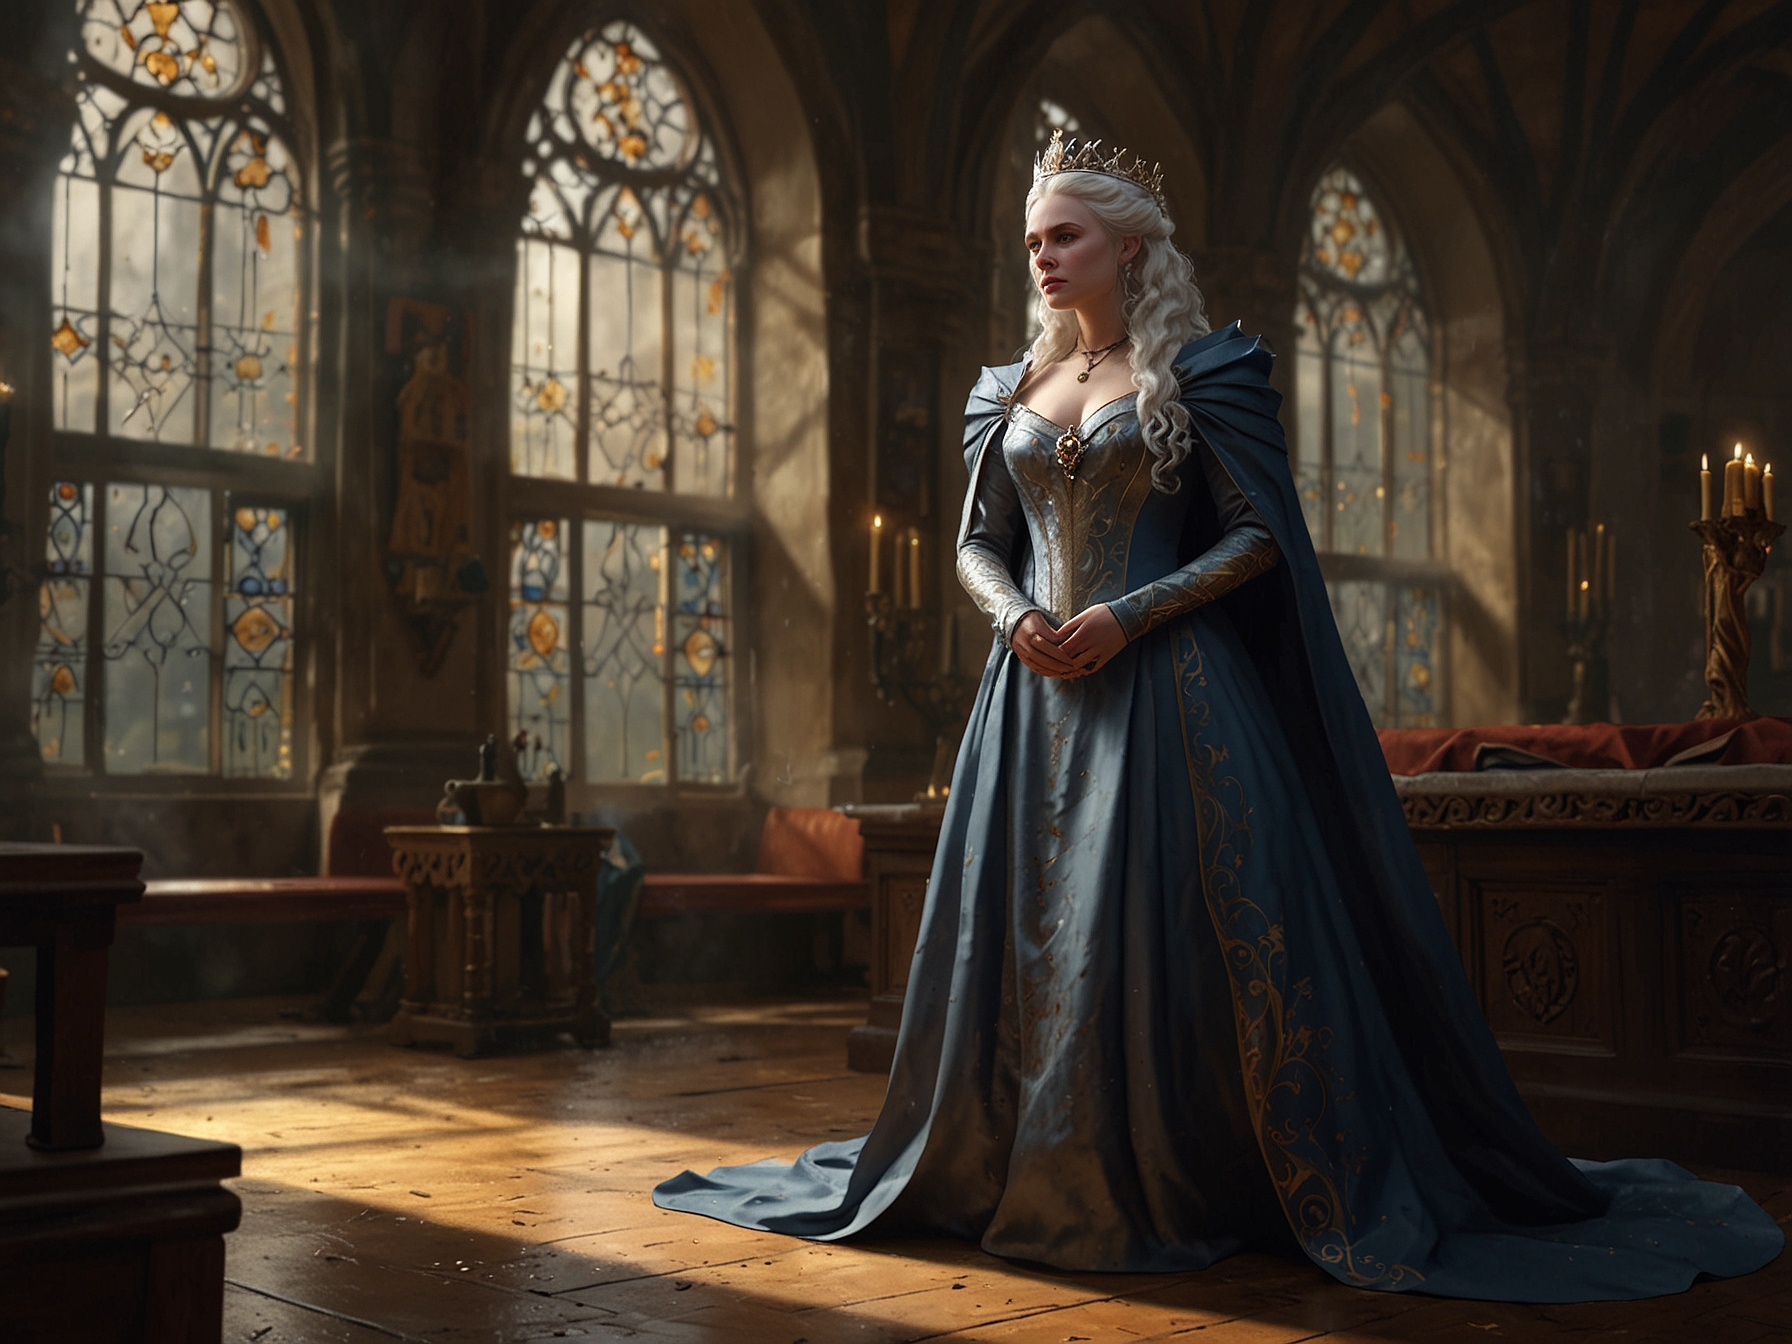 Rhaenys Velaryon, the 'Queen Who Never Was,' is portrayed with deep inner conflicts and ambitions, providing a three-dimensional insight that elevates her character from the historical figure in the book.